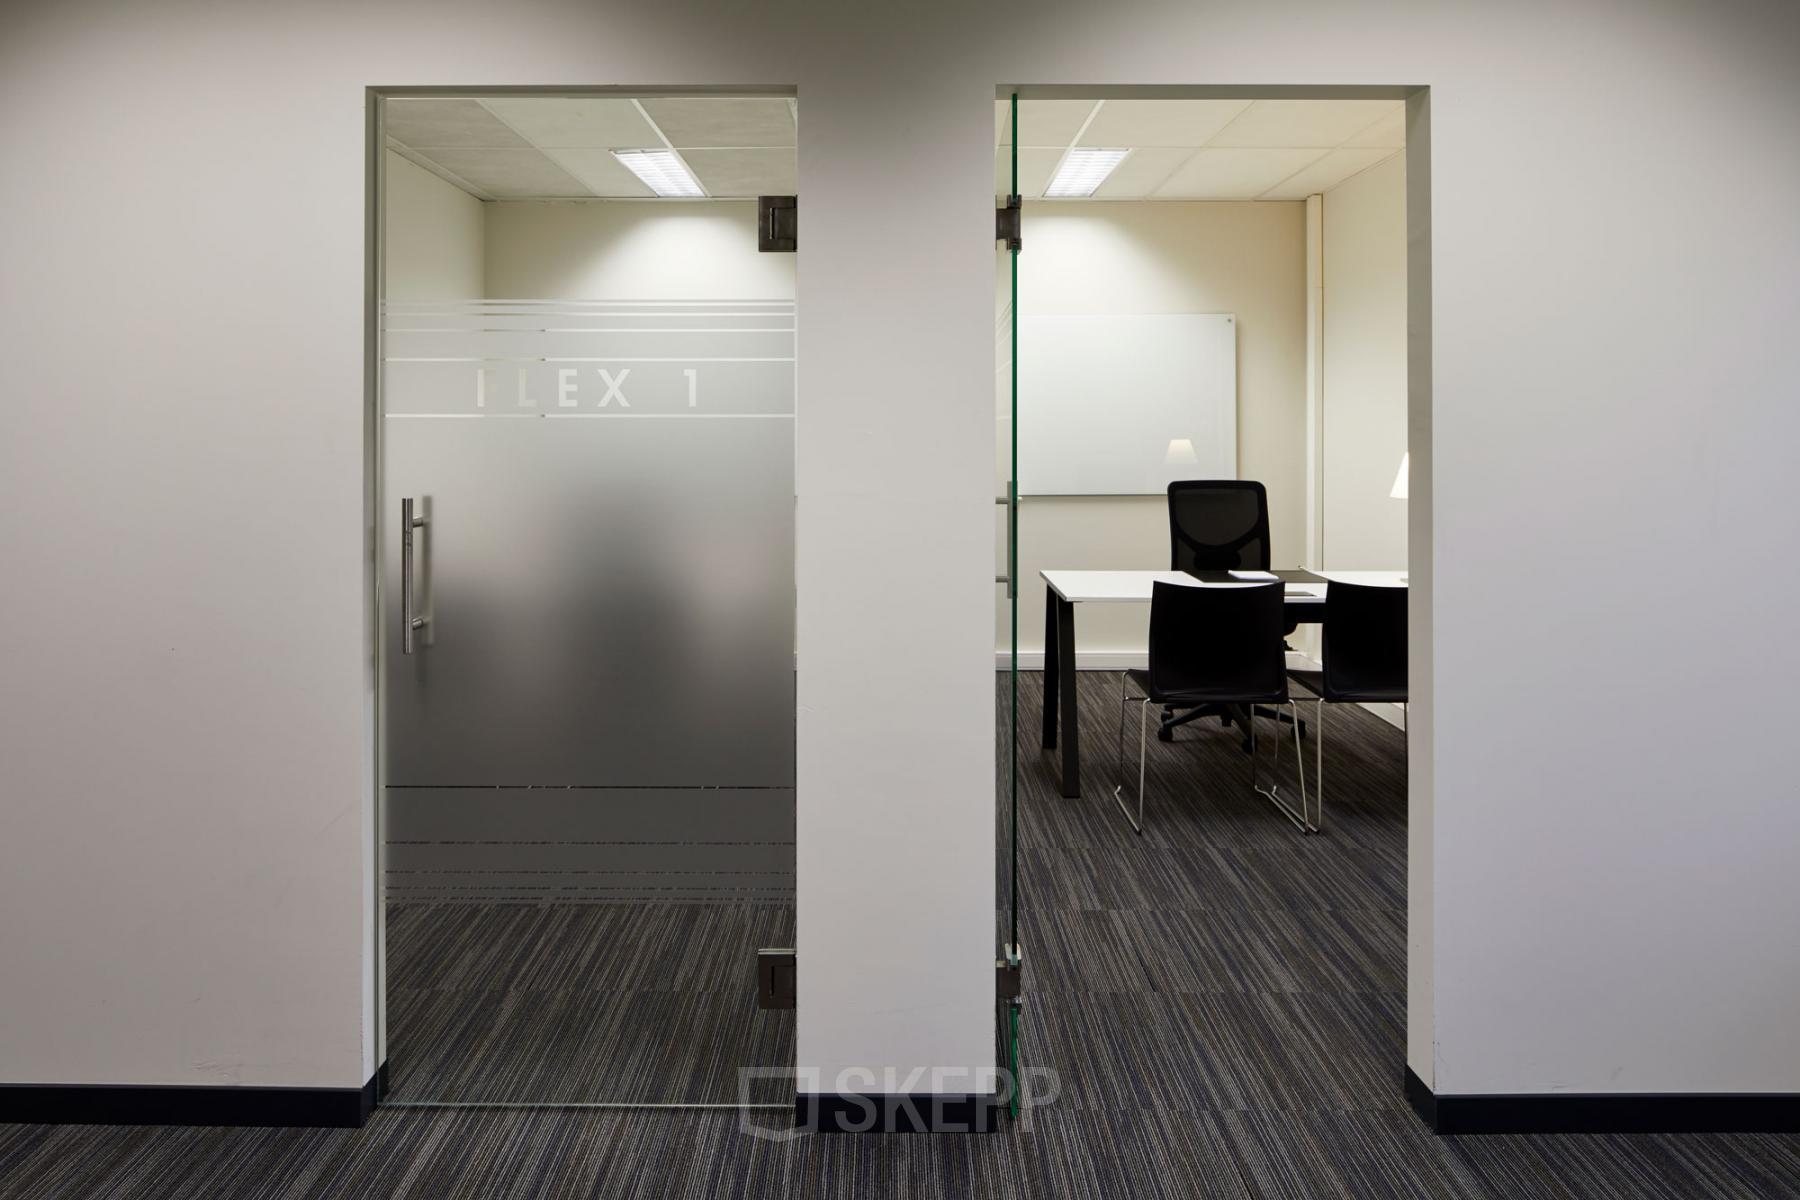 flex offices with a glass door